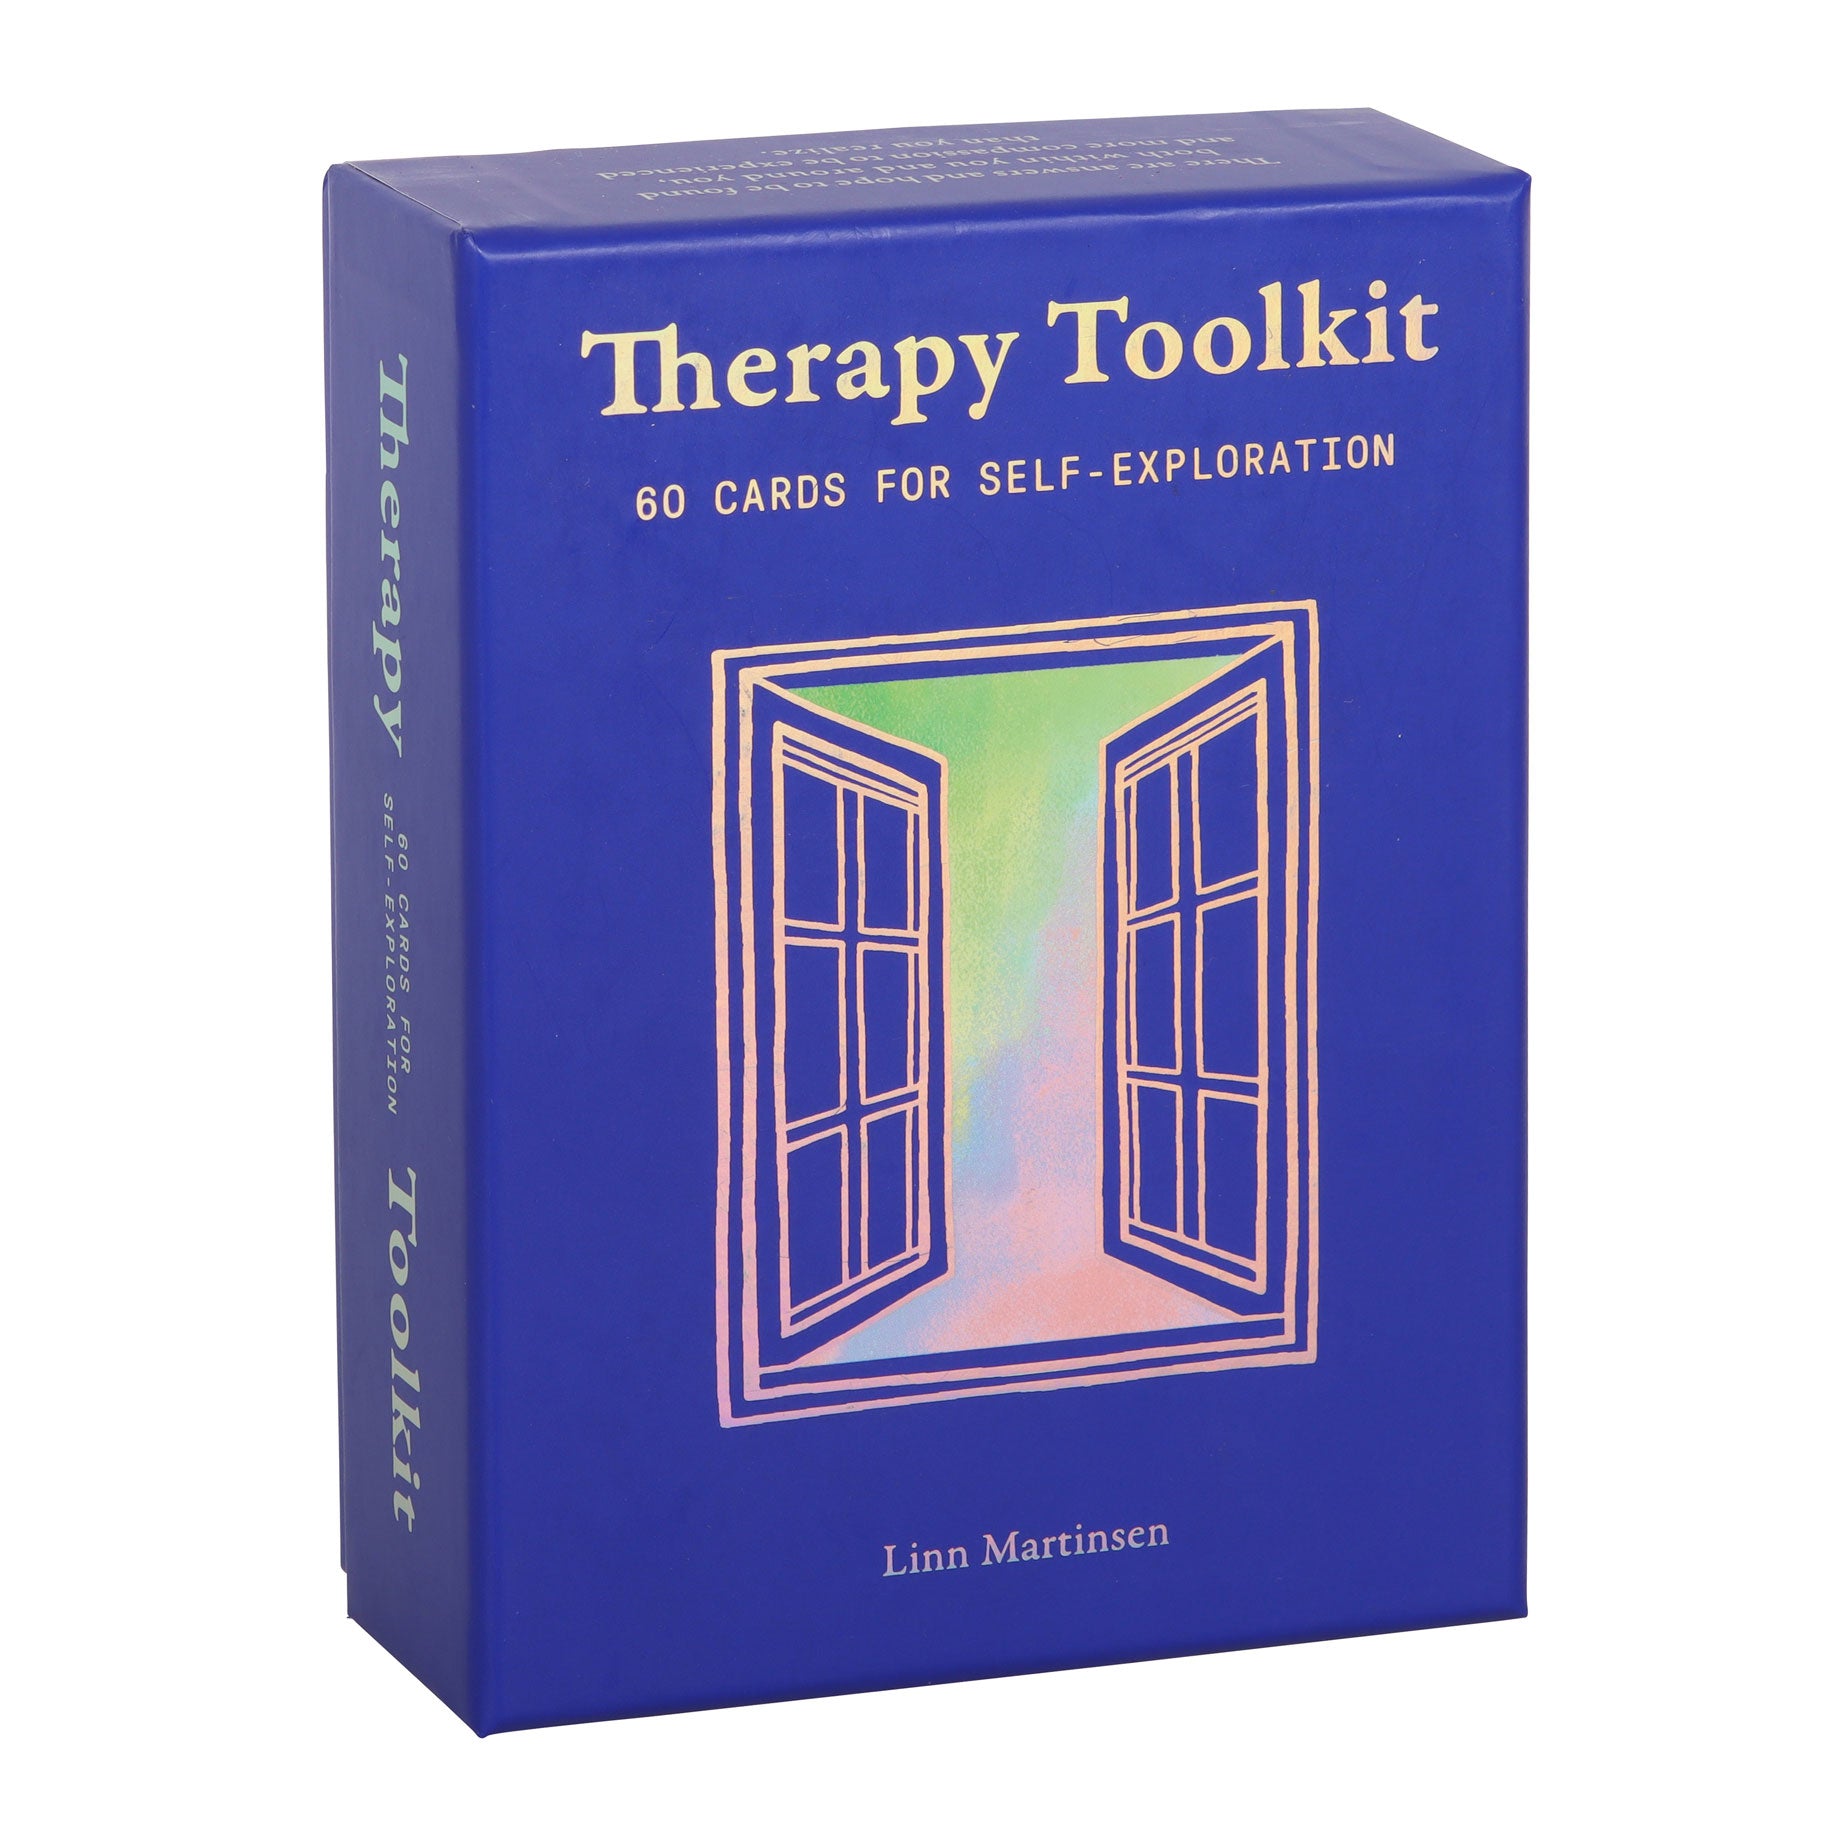 View Therapy Toolkit Cards for Self Exploration information